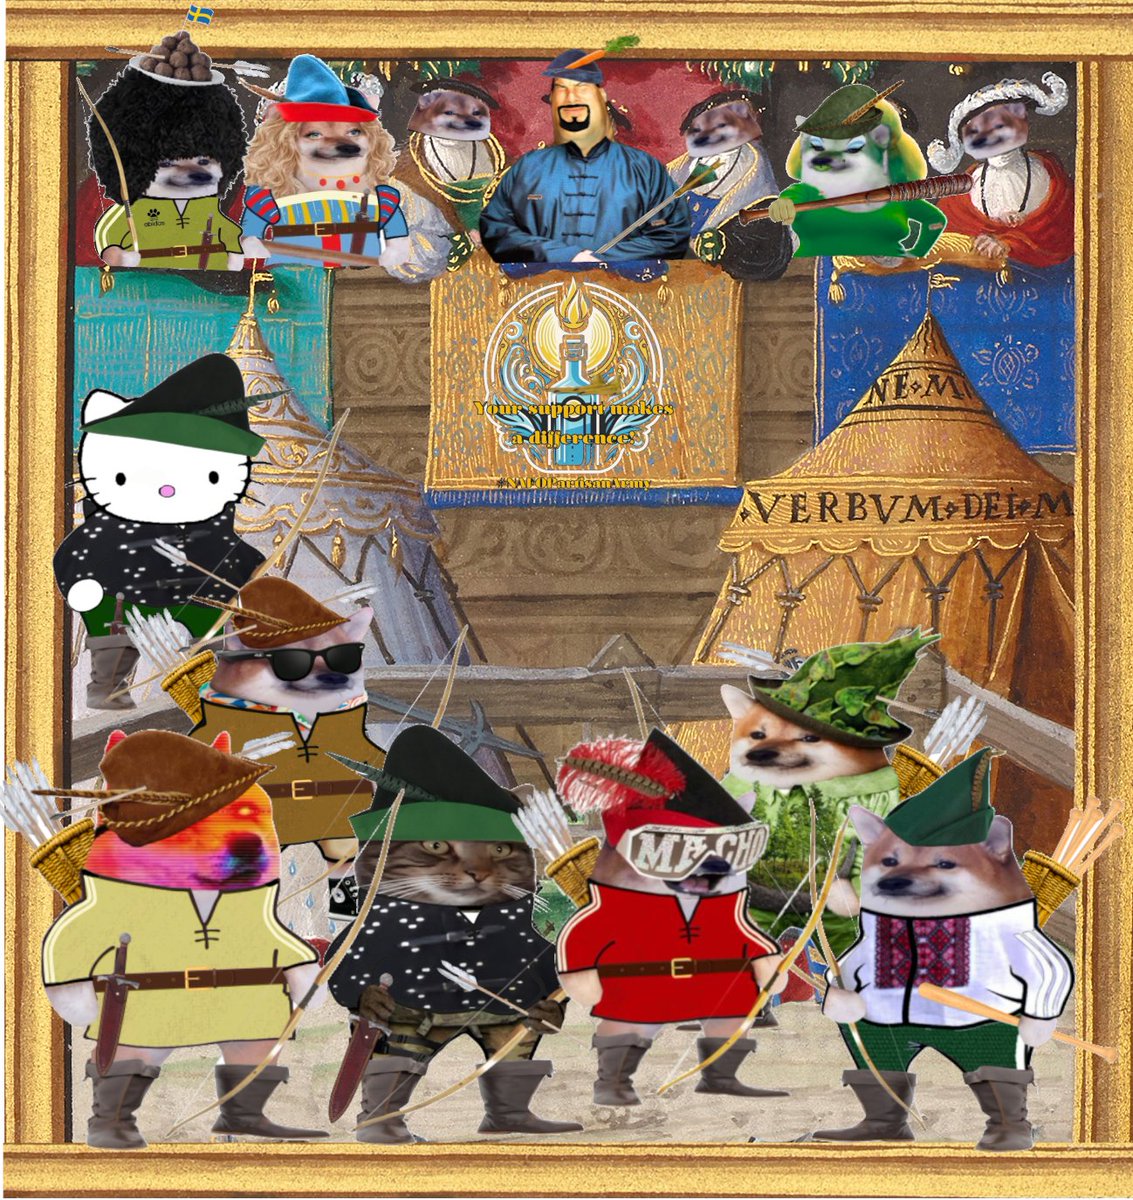 Seven of the Very Merry Fellas were outstanding bowmen. @bettypge69 @davebeingdave @CGordon42534727 @TinaVelasko @bopandy1 and @joseph__place each stepped forward in turn to aim their longbows. Their arrows flew good and true. Then it was the turn of @cryptoguy245.